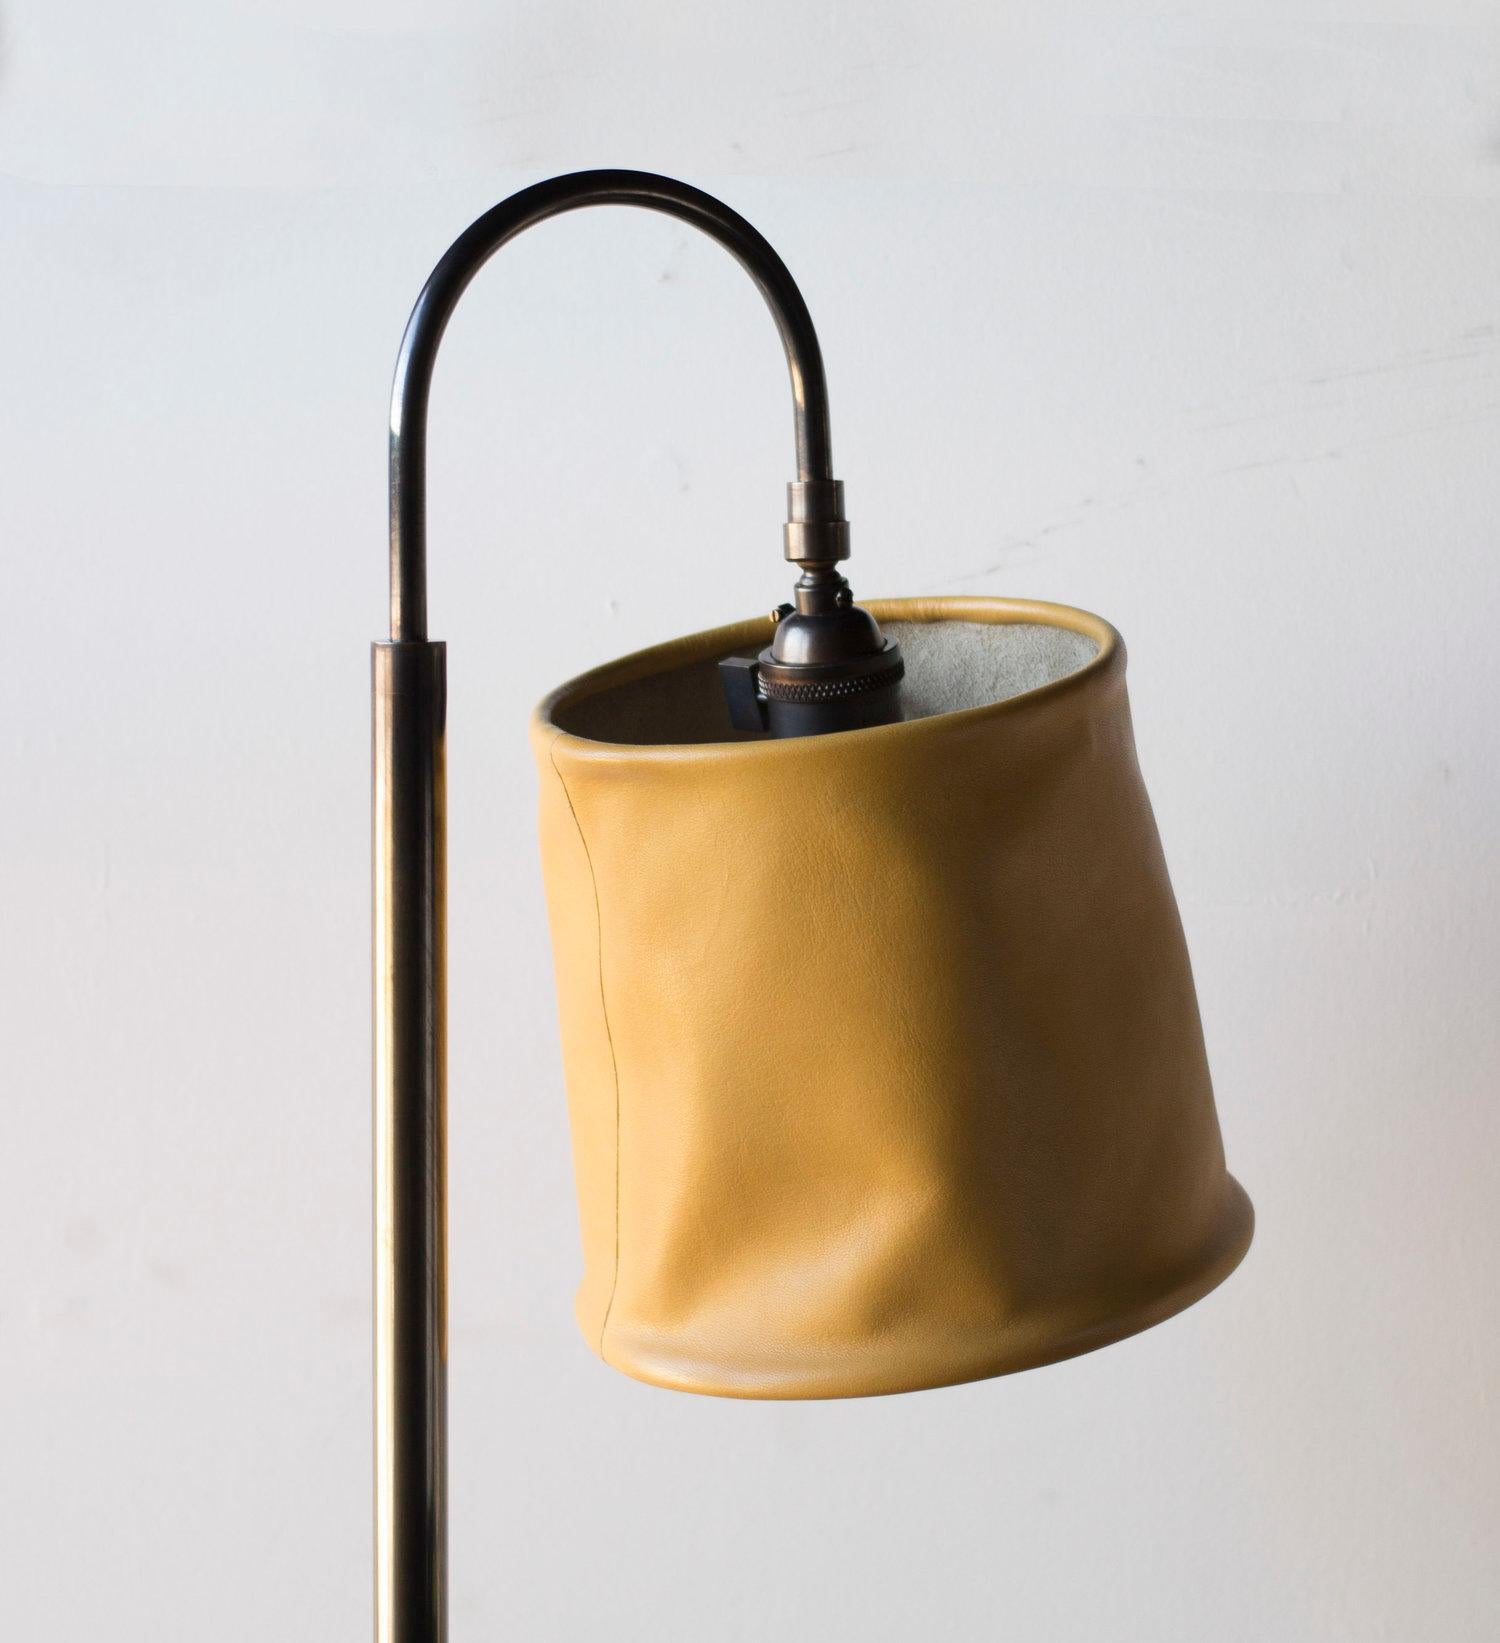 Solid machined brass in dark patinated brass finish, hand-dyed and waxed leather wrapped wood, soft unstructured pivoting leather shade, hand-dyed braided cotton cord. All material finishes are living finishes: they will change and patina for the